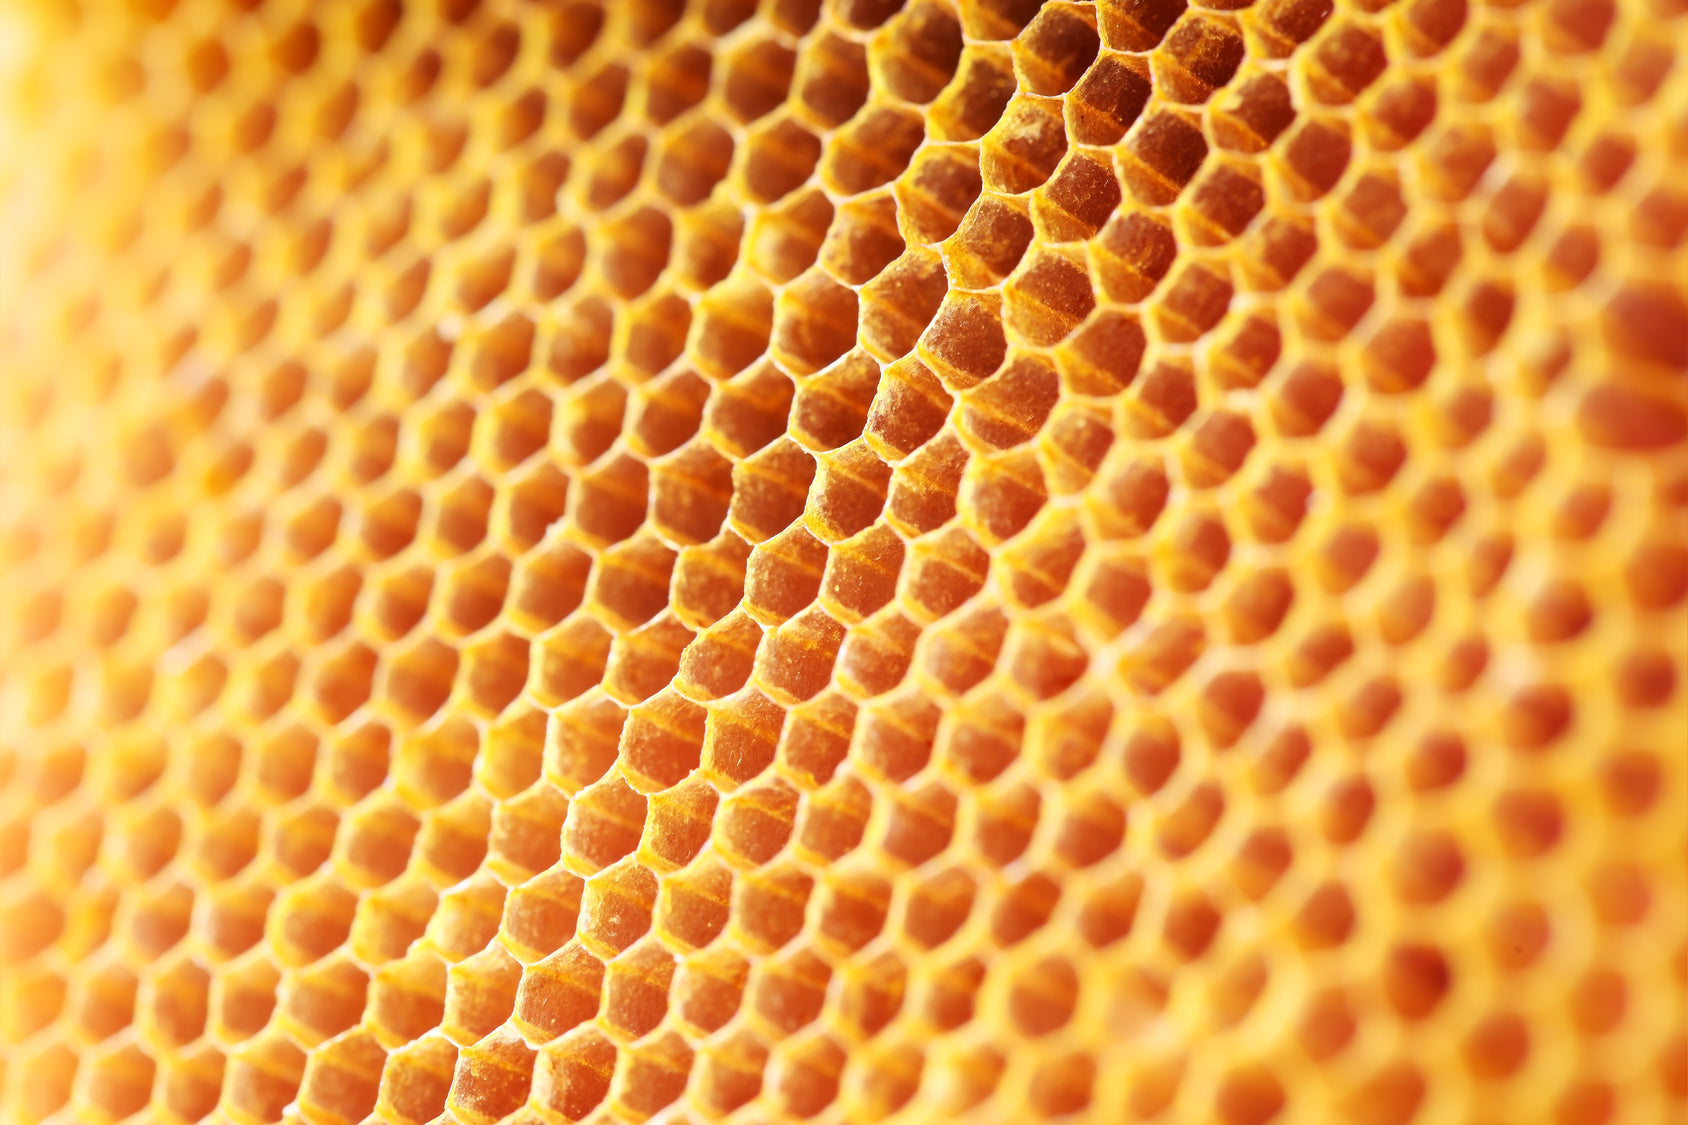 5 Delicious Reasons Why Honeycomb Needs to be Part of Your Diet